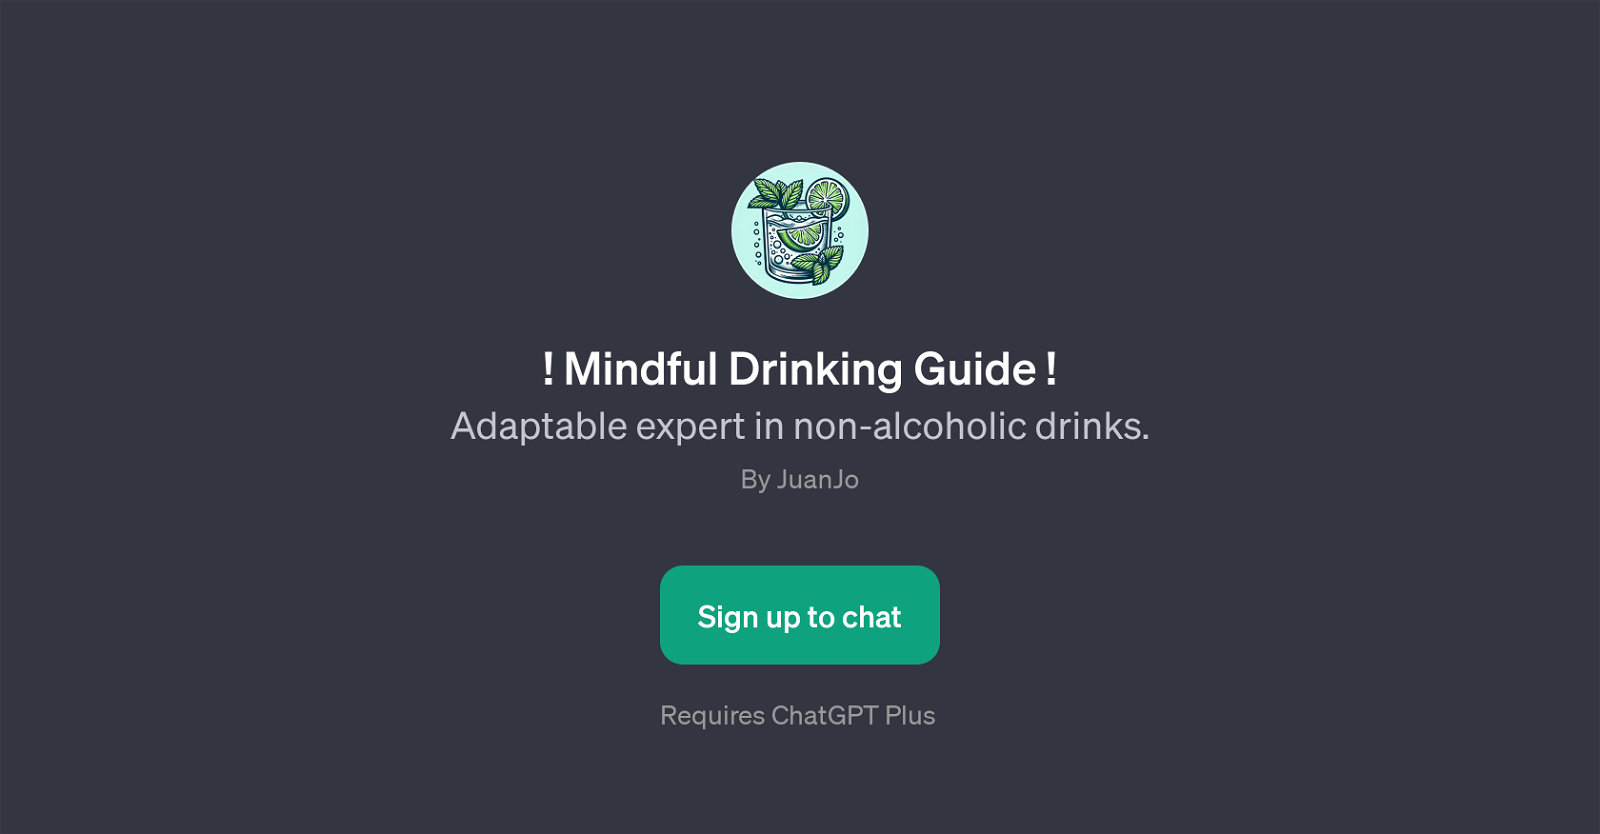 Mindful Drinking Guide website